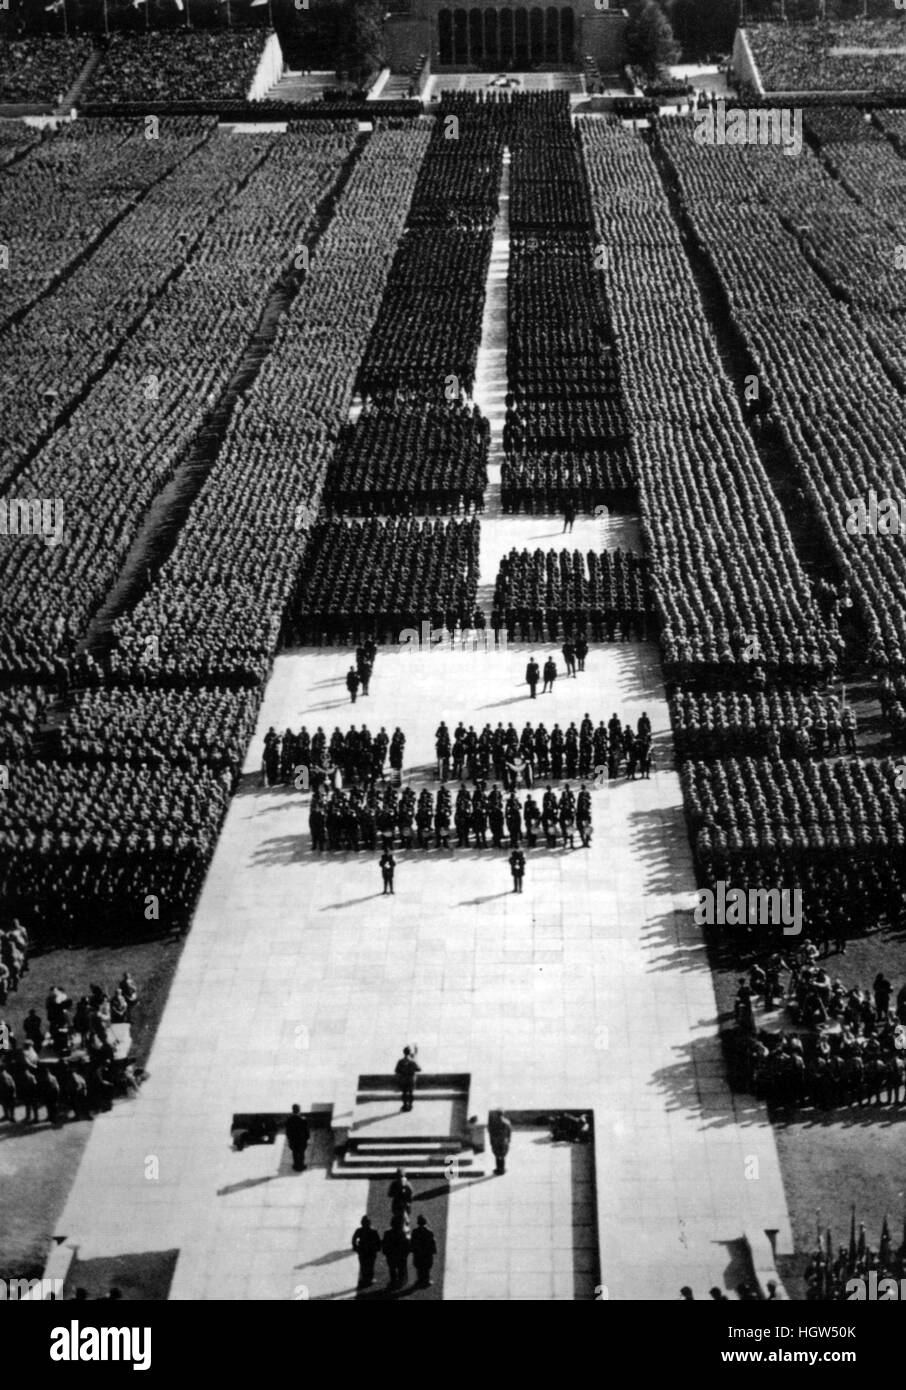 TRIUMPH OF THE WILL 1935  propaganda film directed by Leni Riefenstahl covering the 1934 Nazi Party Congress in Nuremberg Stock Photo